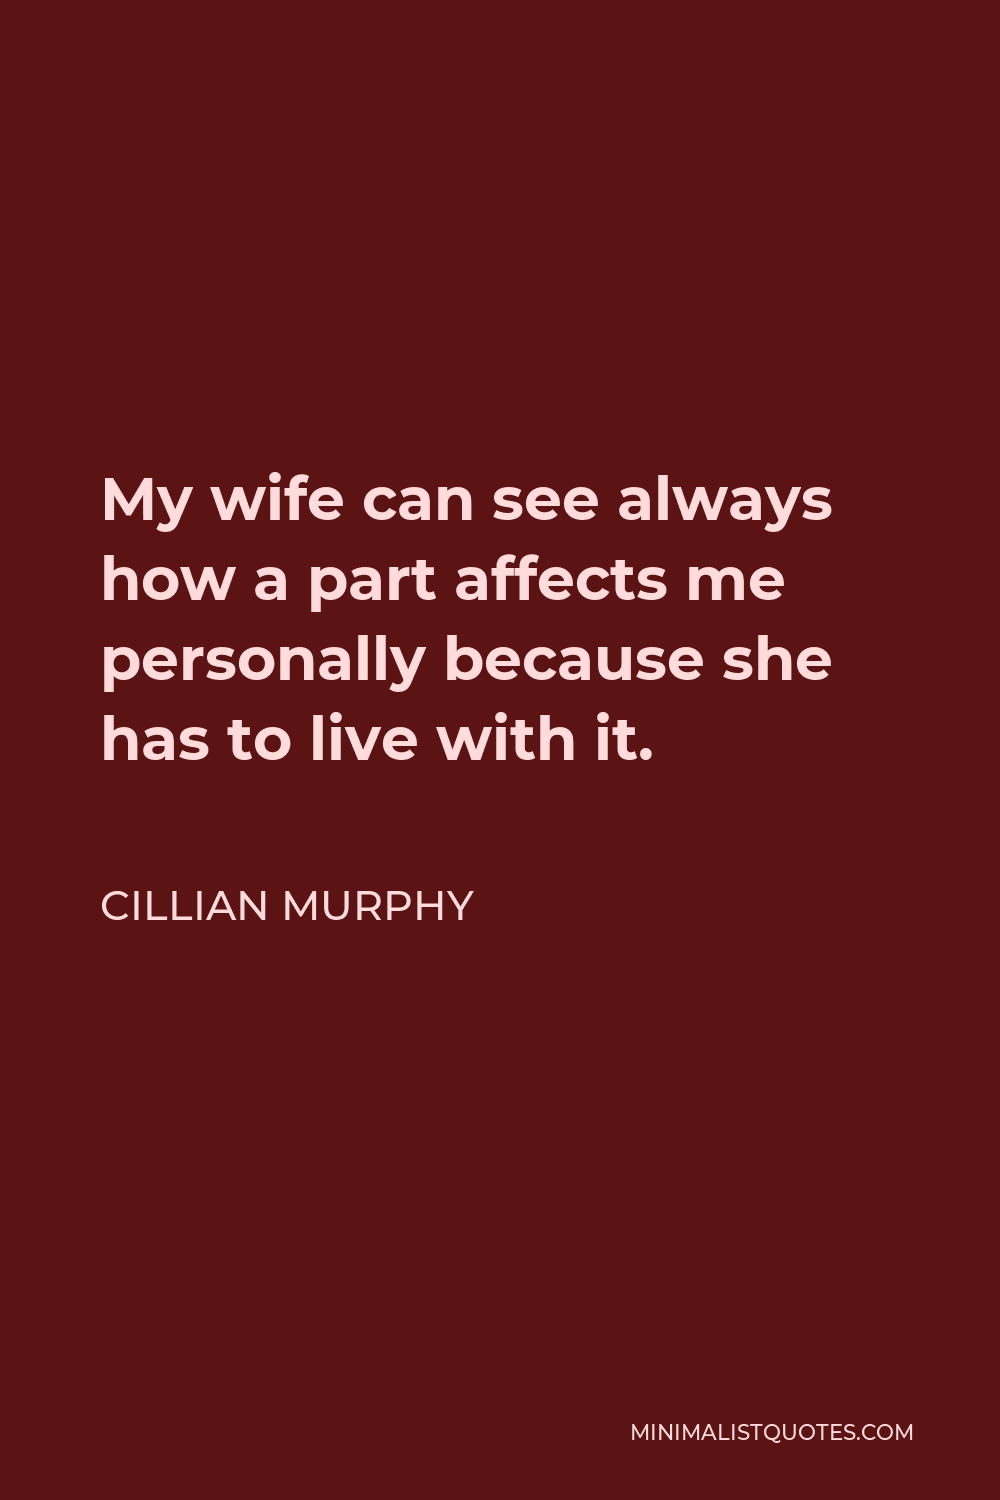 Cillian Murphy Quote - My wife can see always how a part affects me personally because she has to live with it.